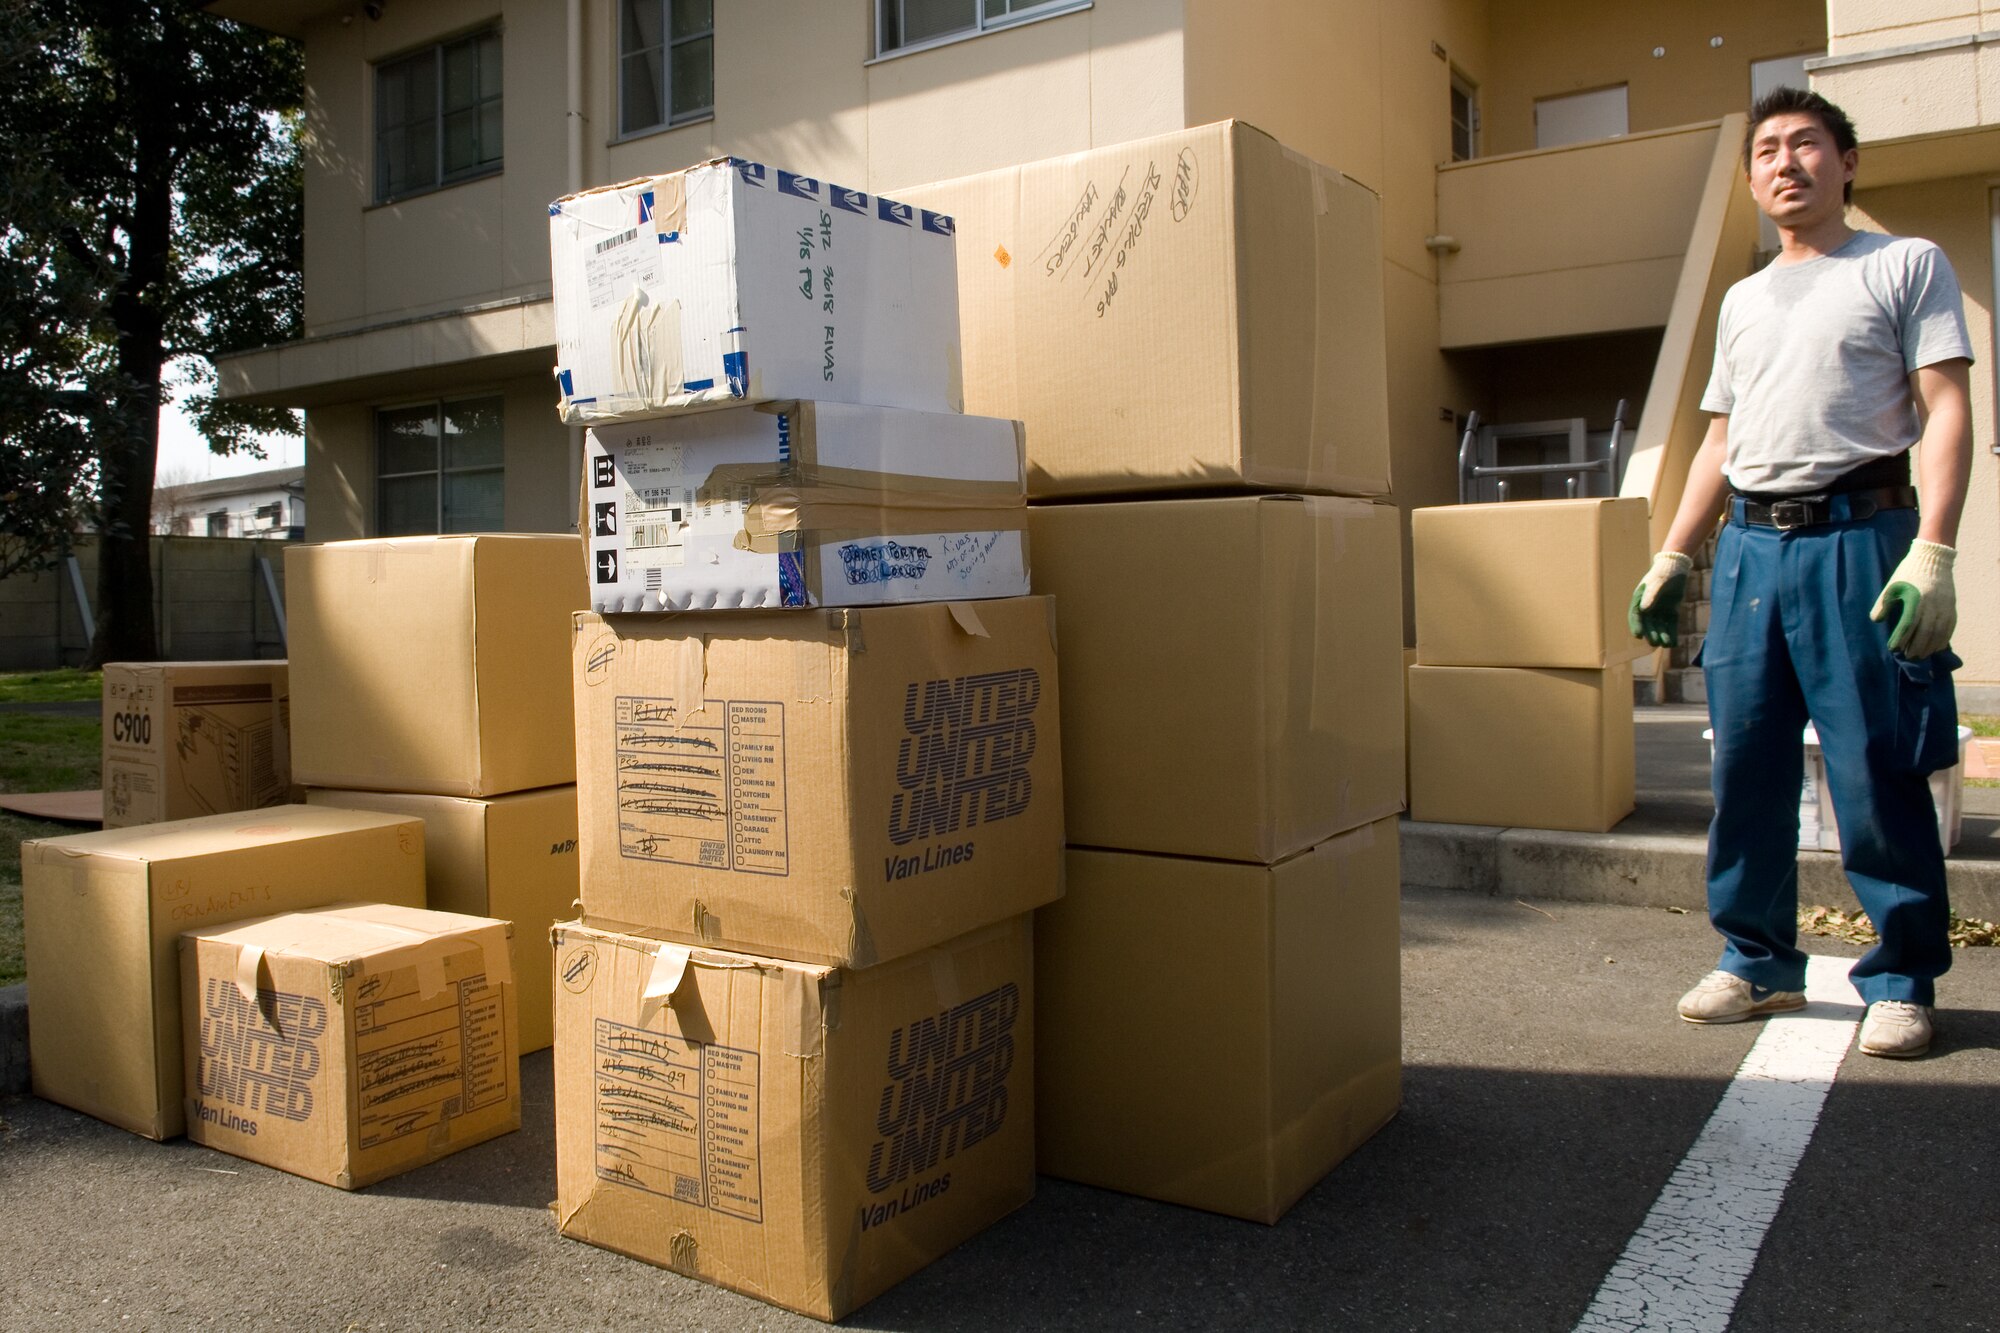 YOKOTA AIR BASE, Japan -- The 374th Logistics Readiness Squadron transitioned to the Defense Personal Property Systems March 16 in an effort to simplify the shipment of personal property for Department of Defense personnel. (U.S. Air Force photo/Osakabe Yasuo)